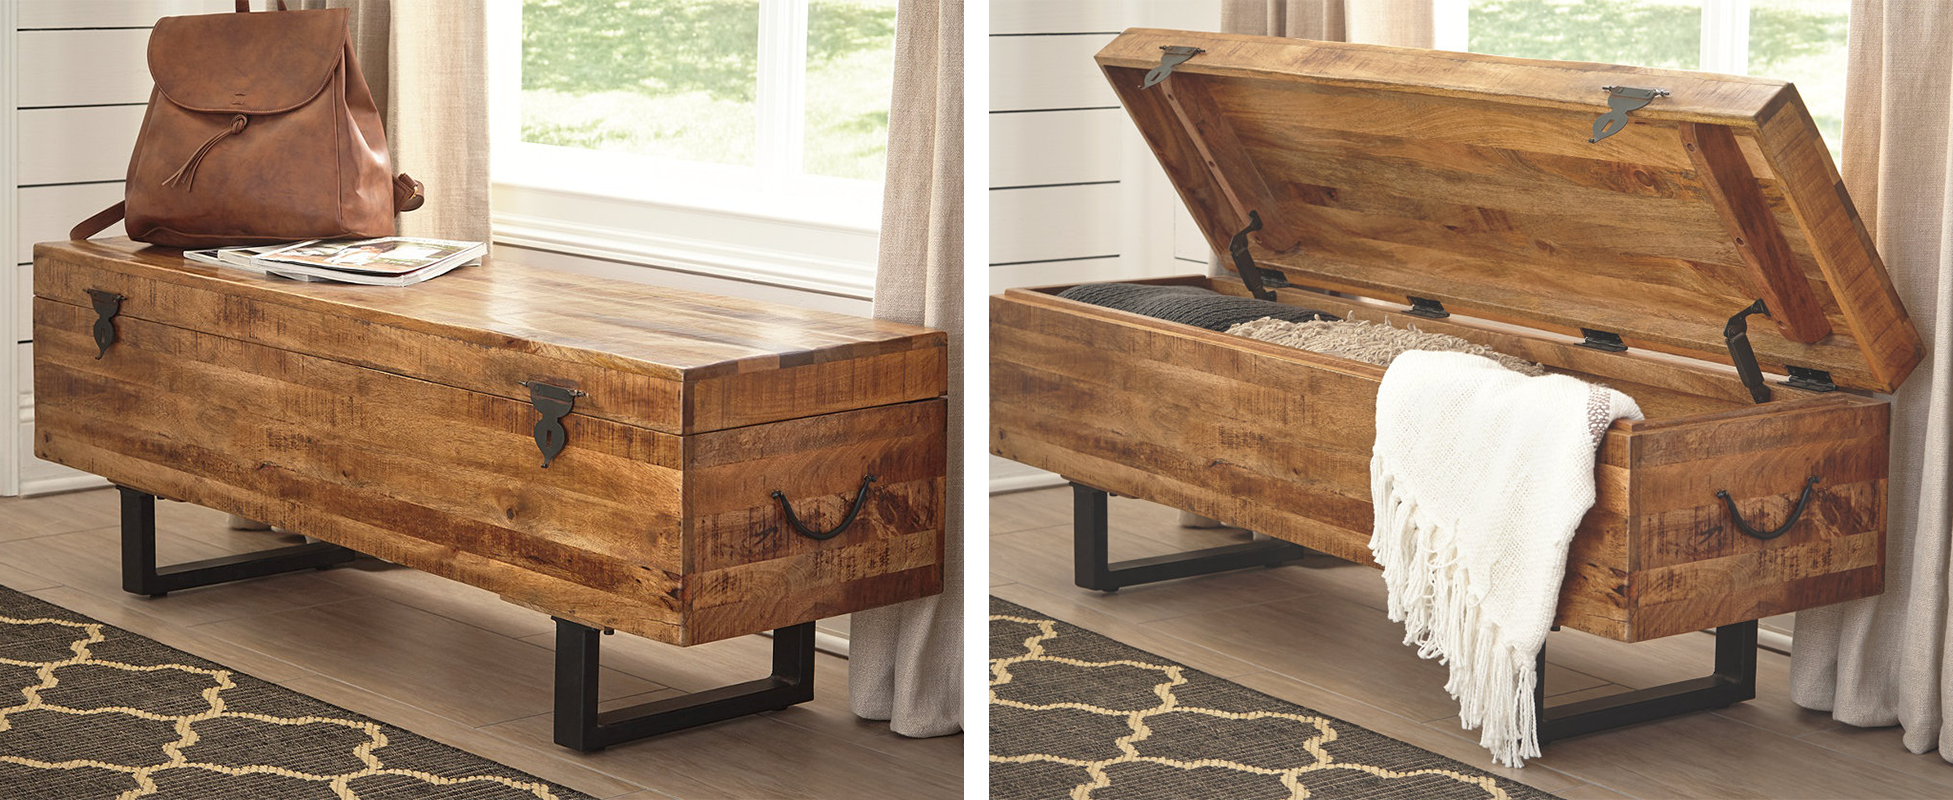 Brown wooden rustic bench that opens up for extra storage.